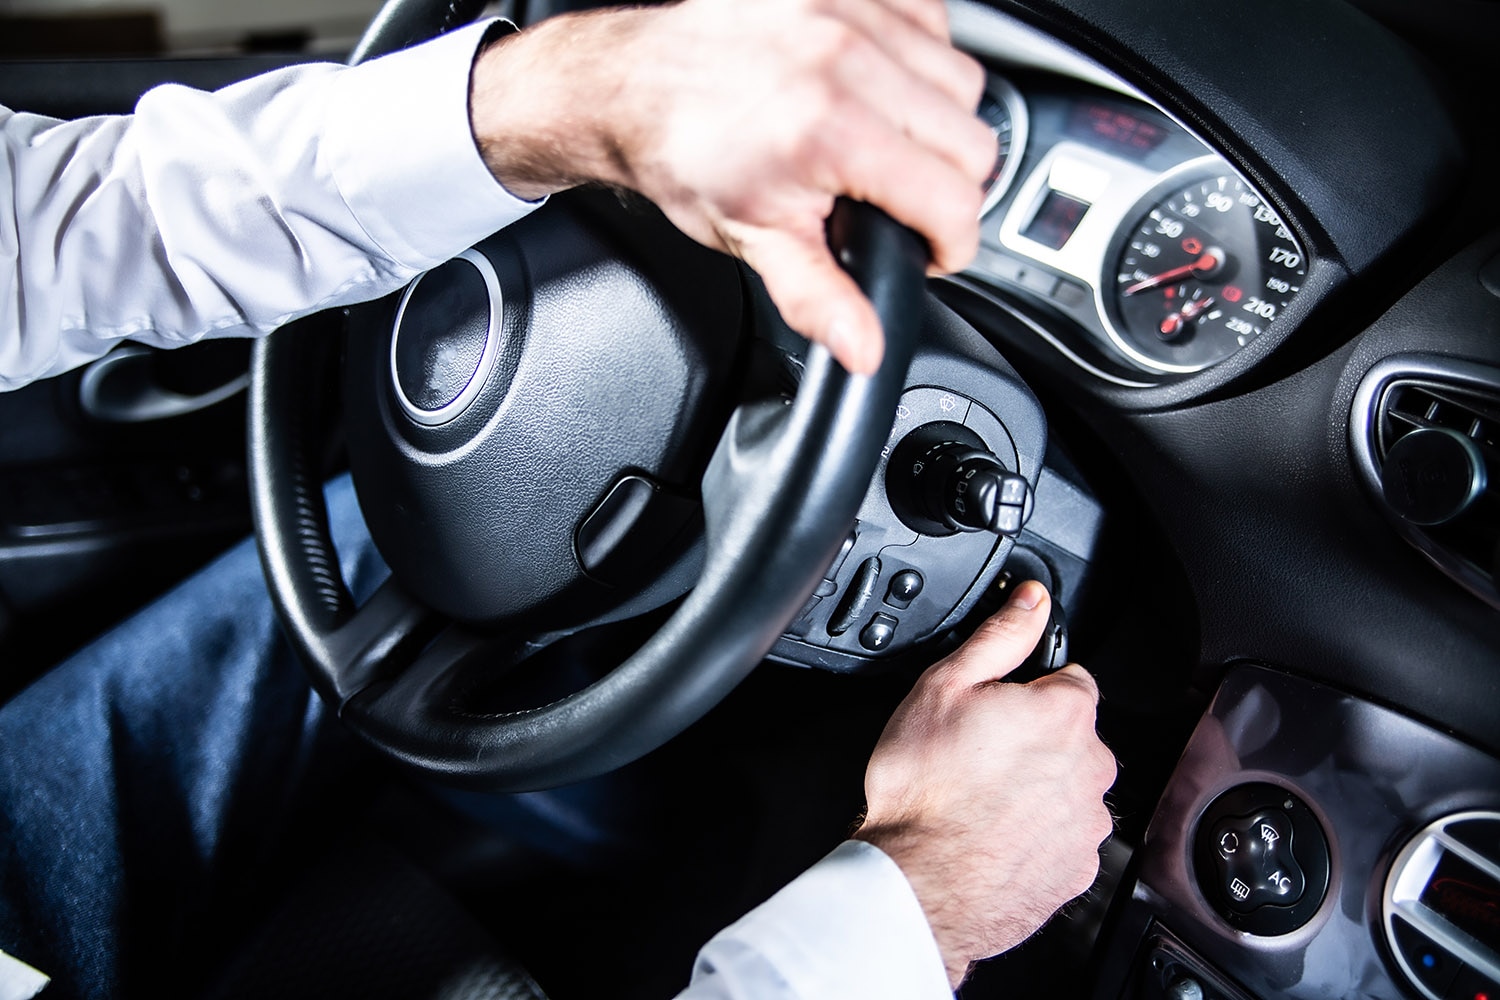 A driver's hands on the steering wheel and the ignition of a car